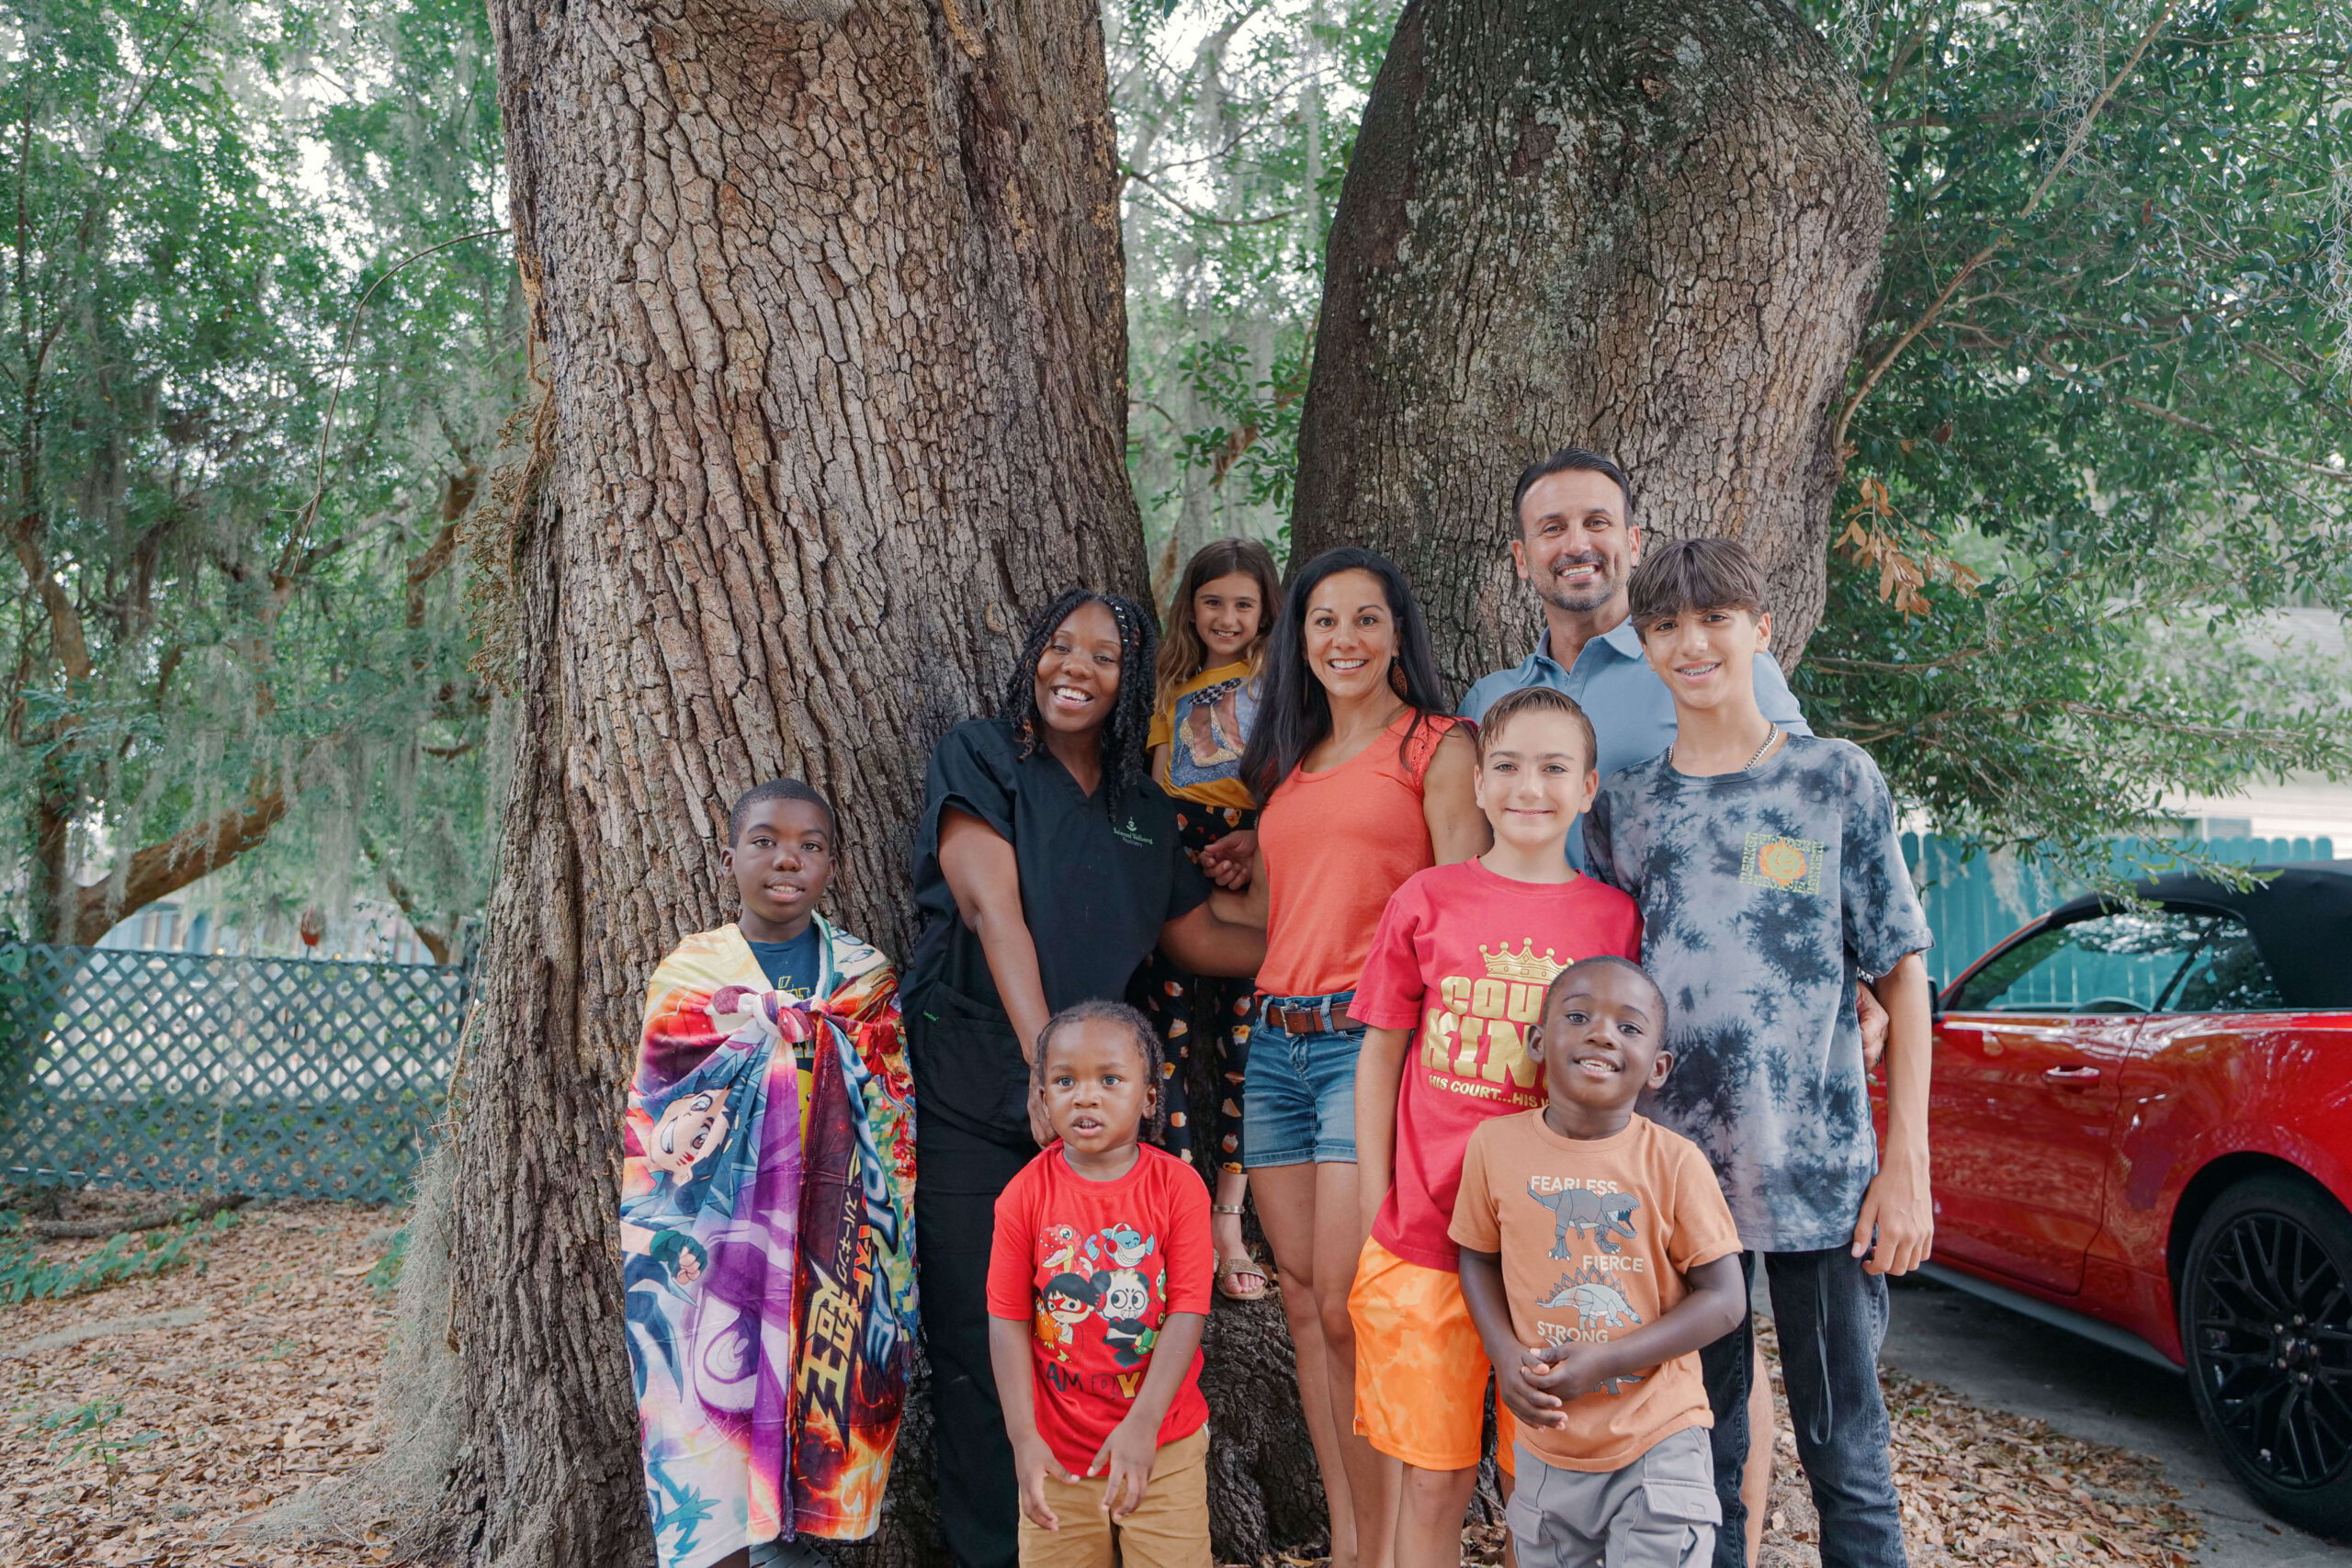 Two families gather in front of two enormous tree trunks